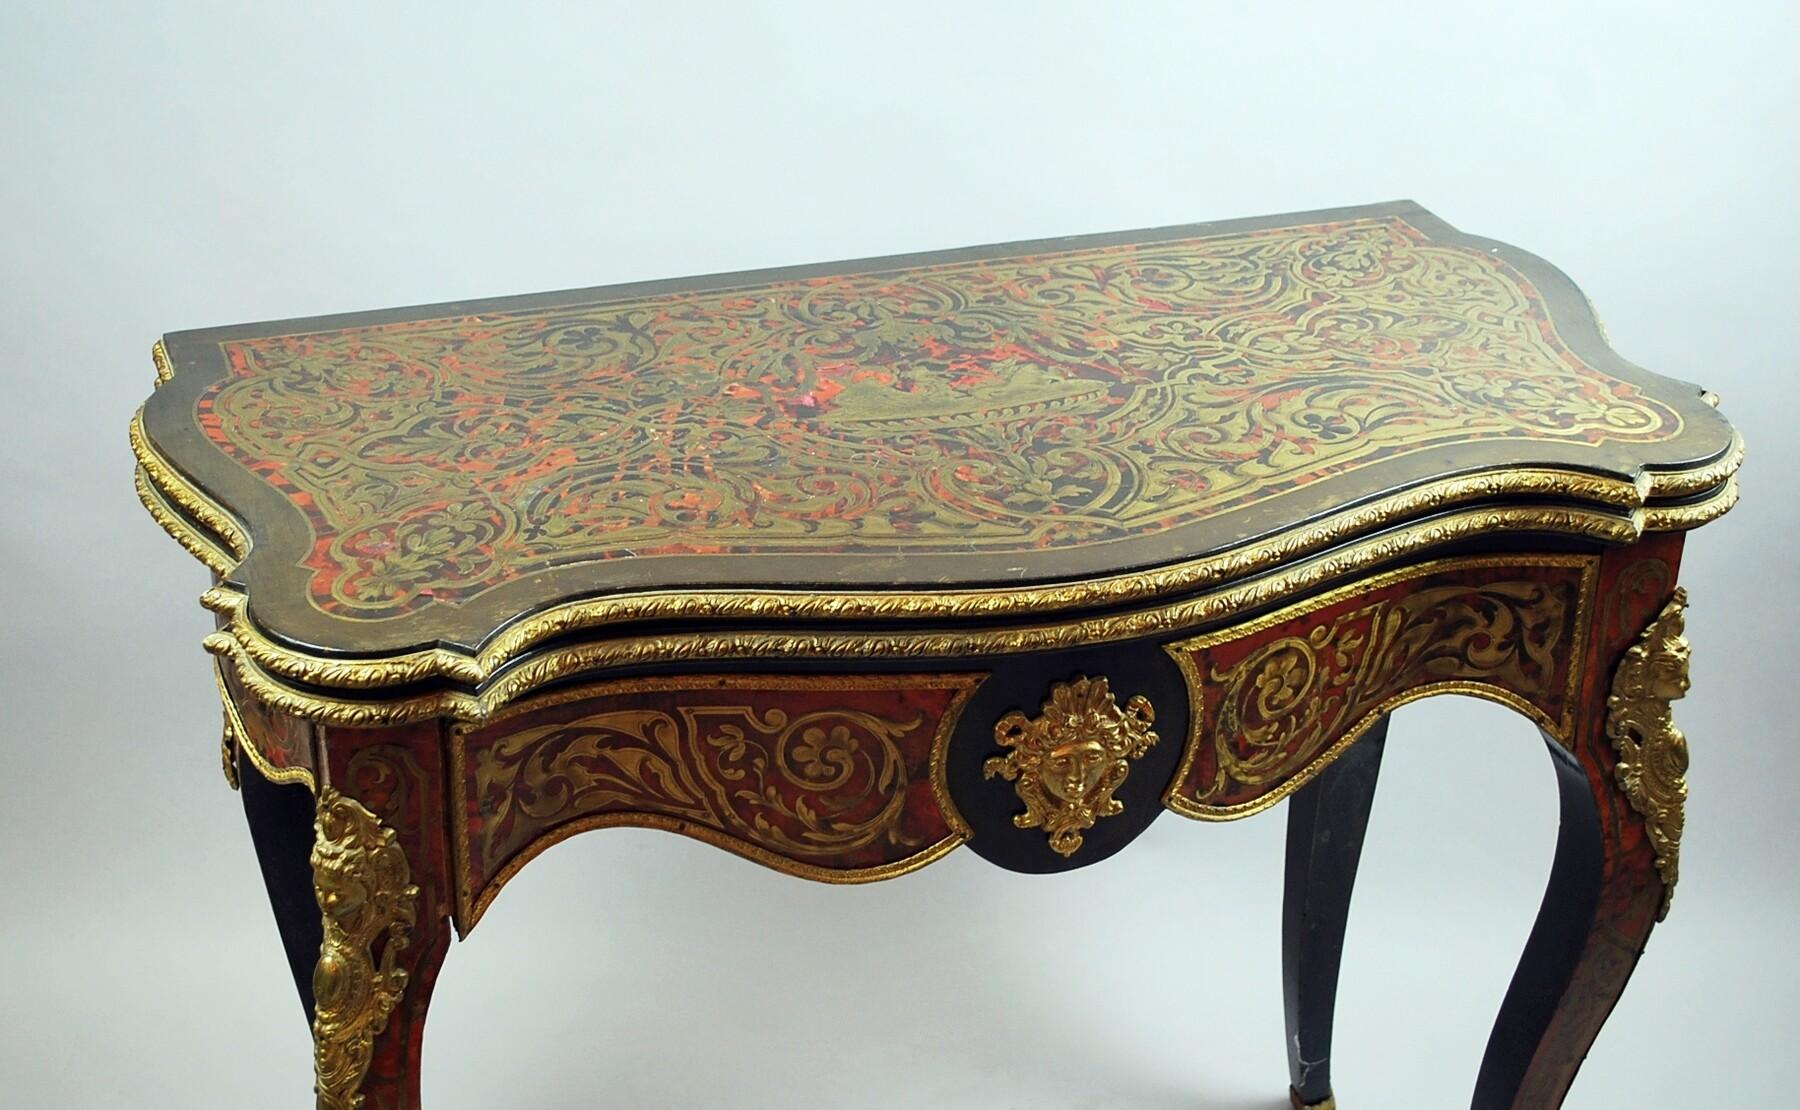 19th Century Louis XIV Style Game Table with Inlaid Boule Style, Napoleon III Period, c.19th